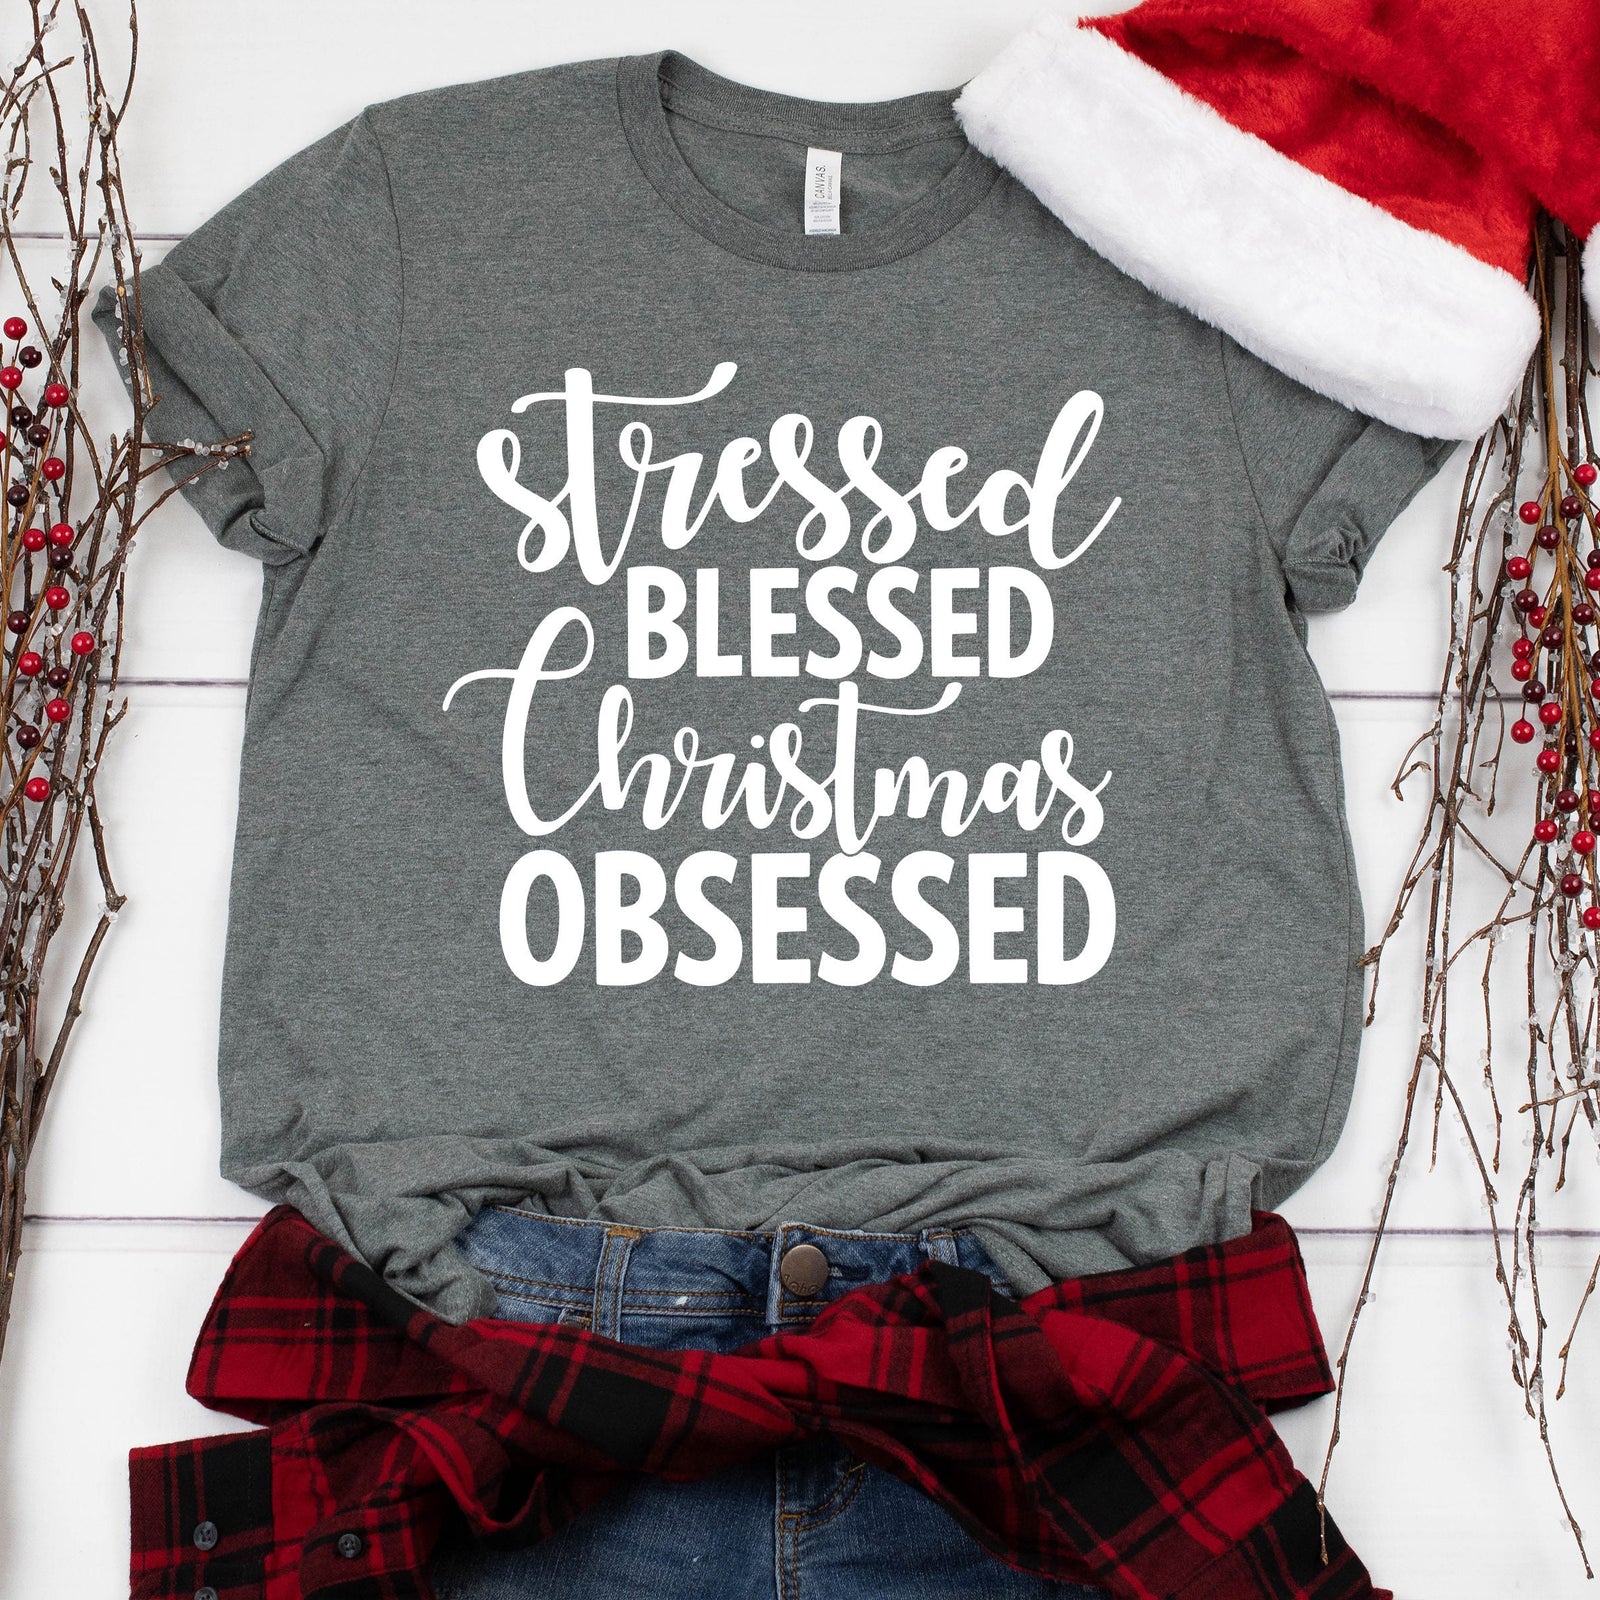 Stressed Blessed Christmas Obsessed T Shirt - Funny Christmas Shirt - Love Christmas Holiday Shirt